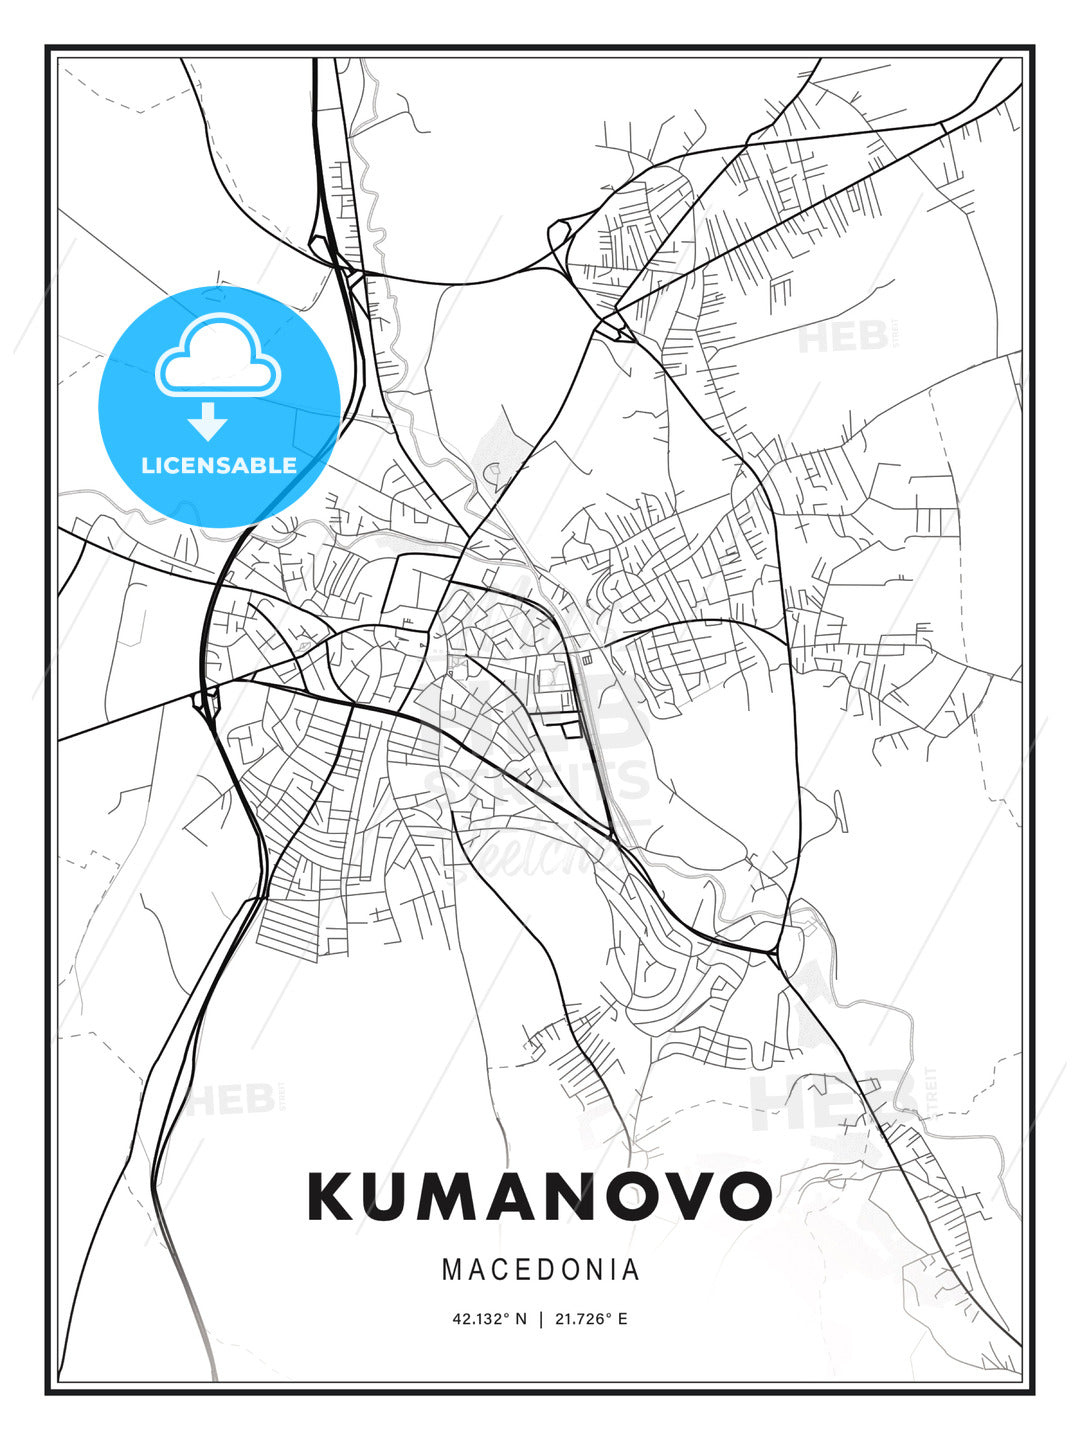 Kumanovo, Macedonia, Modern Print Template in Various Formats - HEBSTREITS Sketches